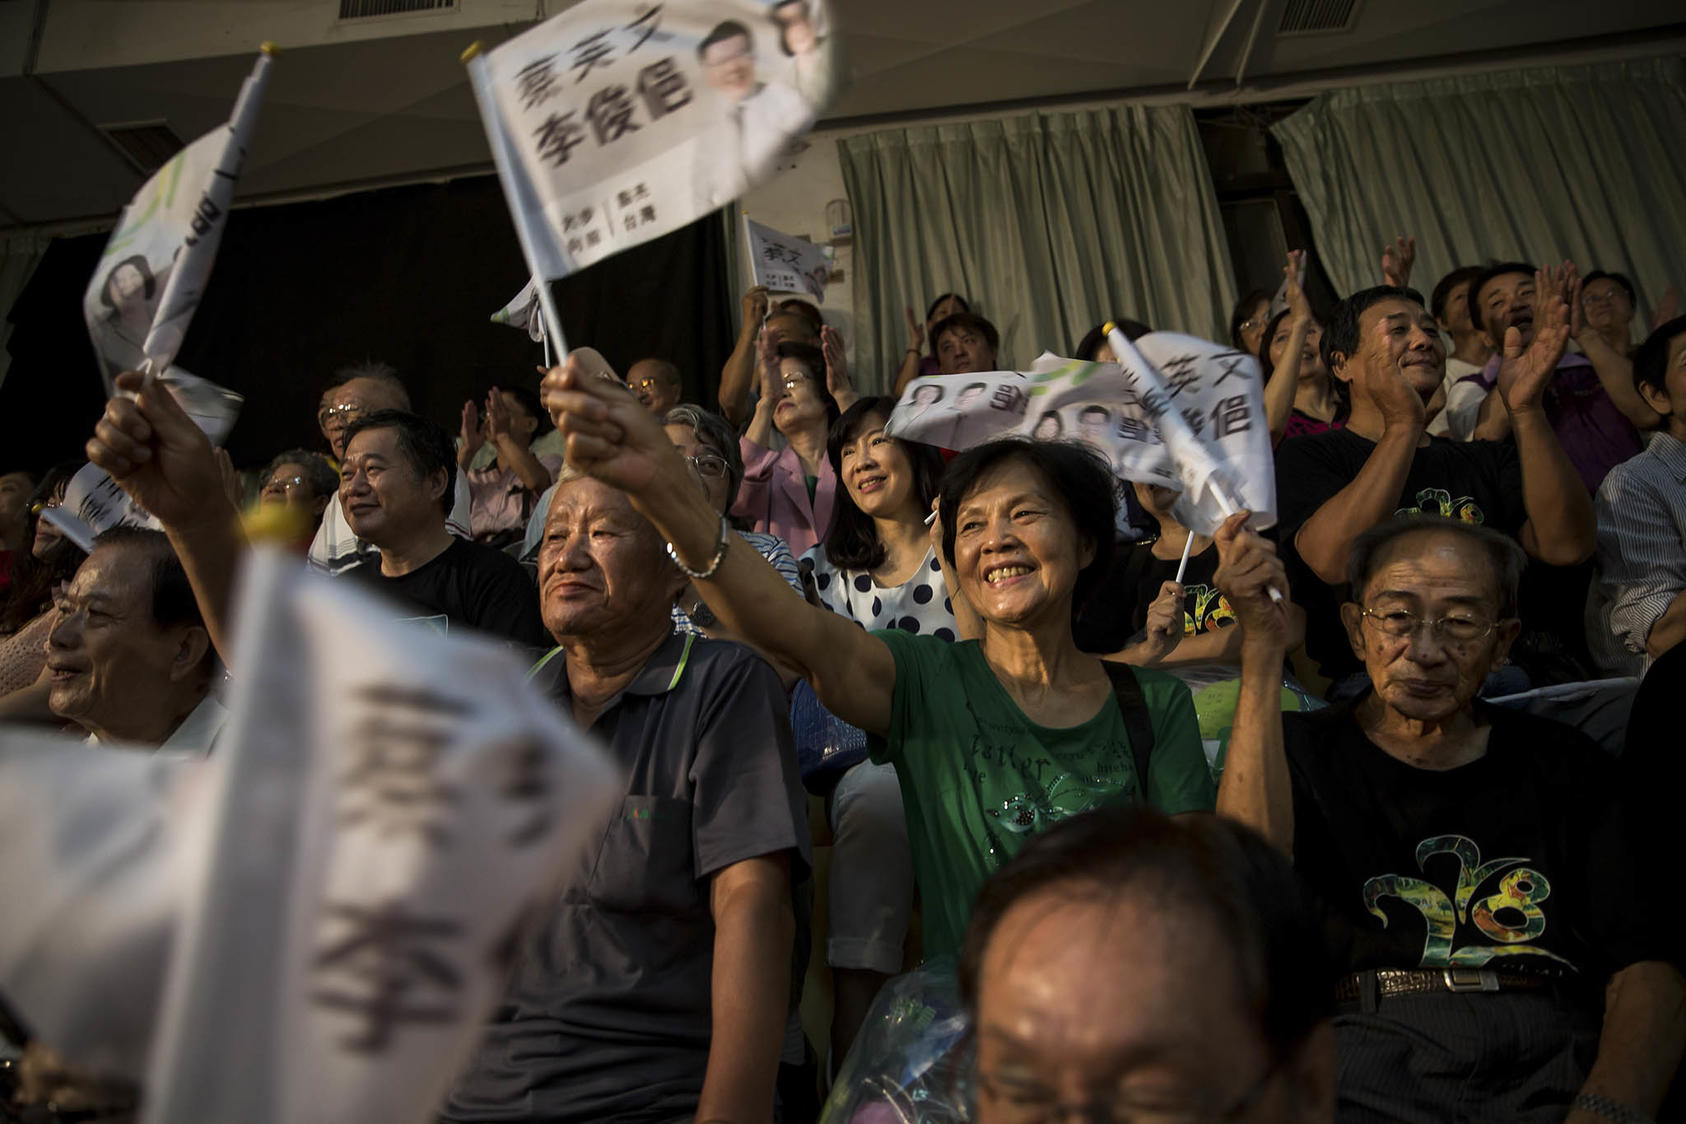 Supporters of Tsai Ing-wen, who is finishing two terms as president, at a campaign event, Sept. 5, 2015. As Tsai leaves office, her replacement will have to navigate tense cross-Strait relations. (Billy H.C. Kwok/The New York Times)